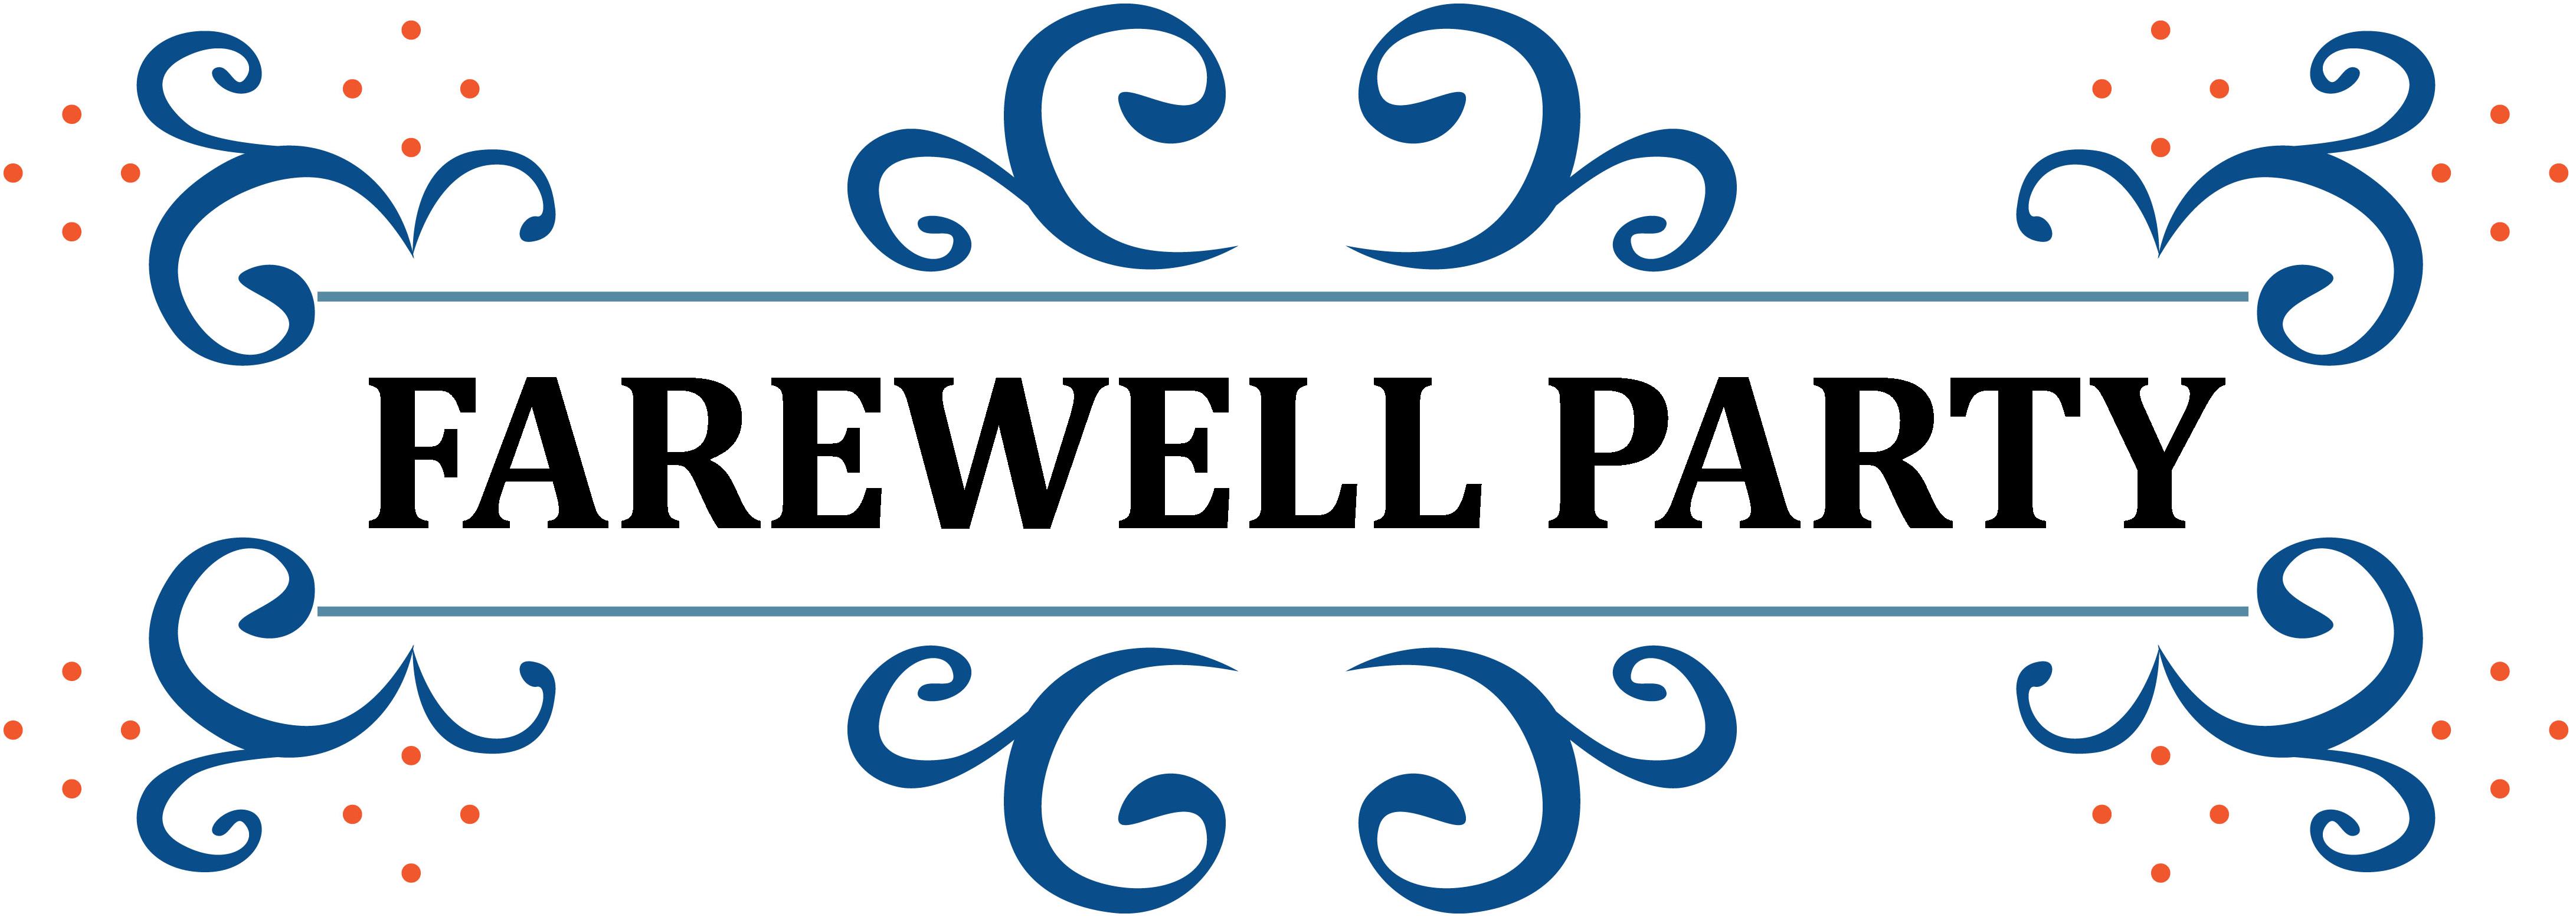 farewell-party2-best-letter-template